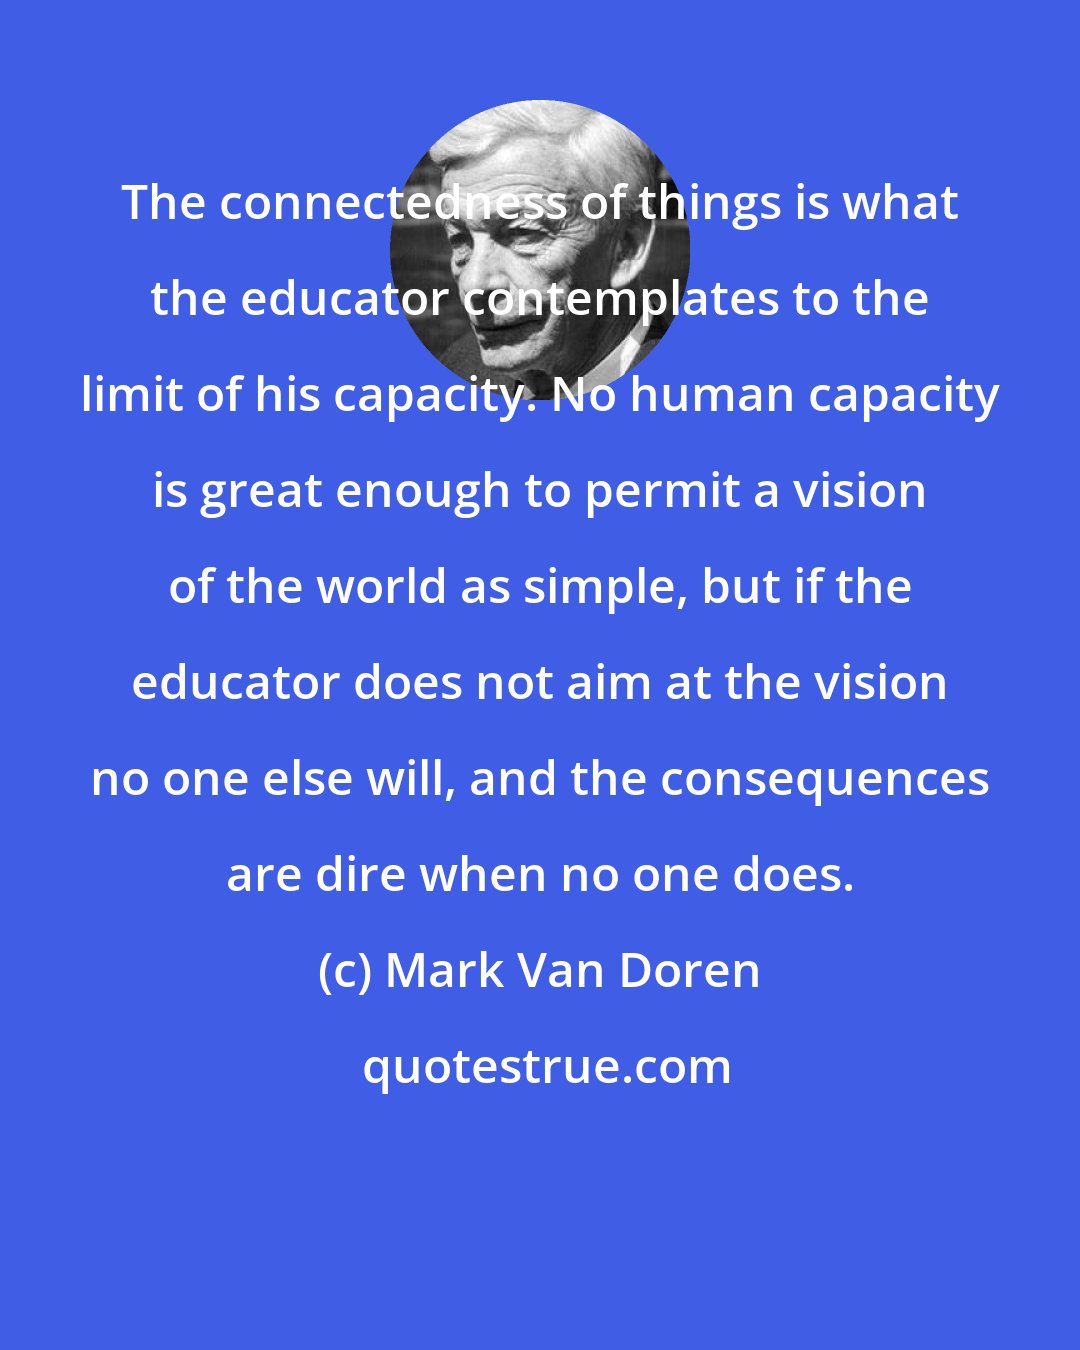 Mark Van Doren: The connectedness of things is what the educator contemplates to the limit of his capacity. No human capacity is great enough to permit a vision of the world as simple, but if the educator does not aim at the vision no one else will, and the consequences are dire when no one does.